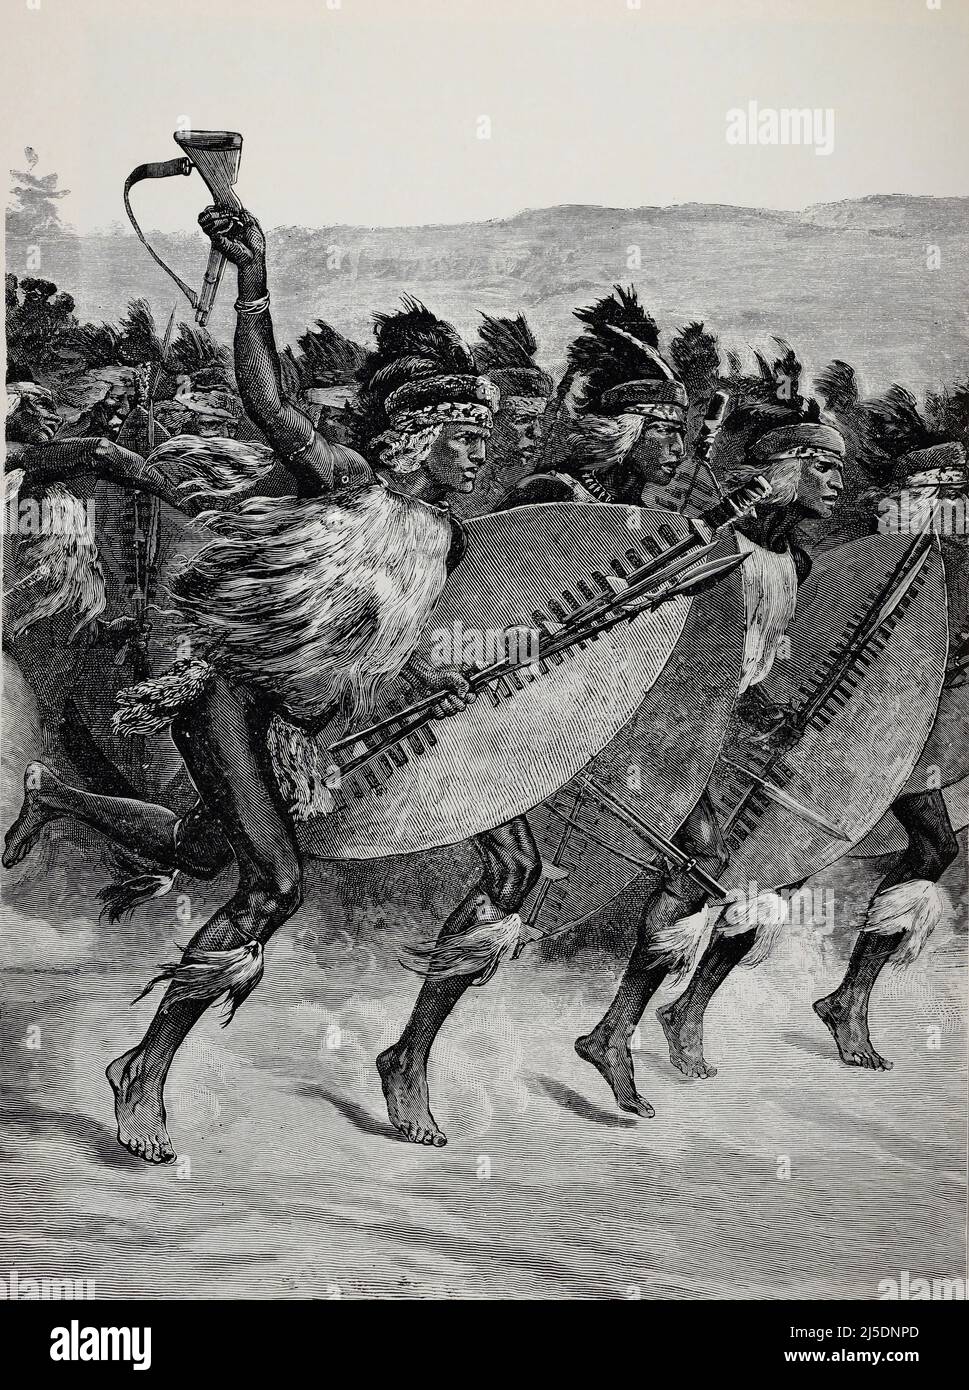 Eng translation : ' ZULUS WARRIORS MARCHING TO BATTLE  ' - Original in french : ' GUERRIERS ZOULOUS MARCHANT AU COMBAT  ' - Extract from 'L'Illustration Journal Universel' - French illustrated magazine - 1879 Stock Photo